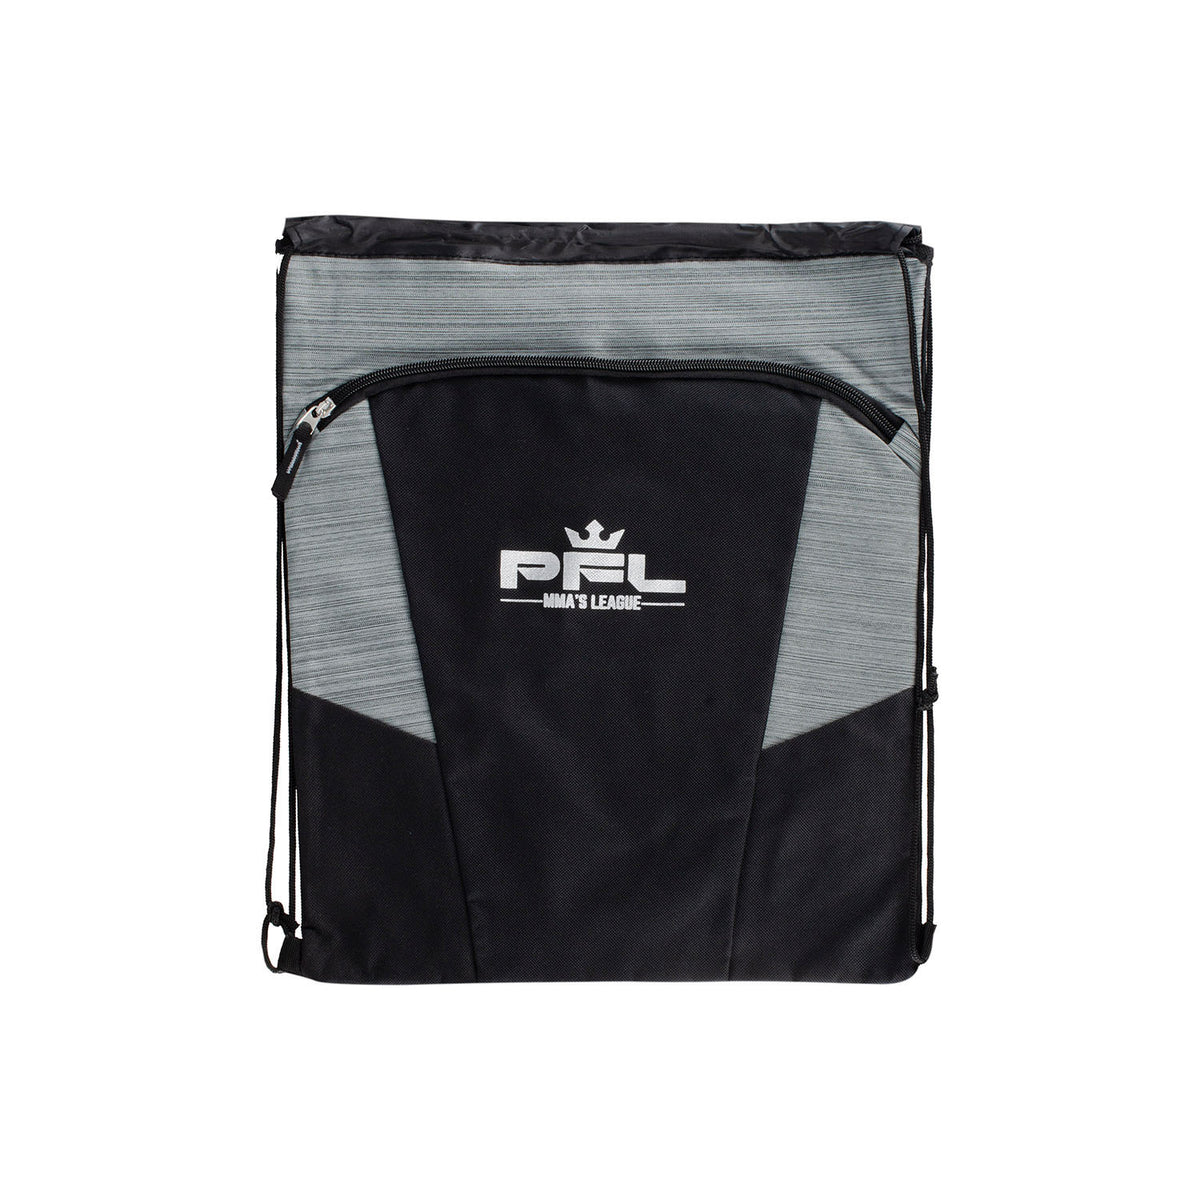 PFL Cinch Bag in Black and Grey - Front View